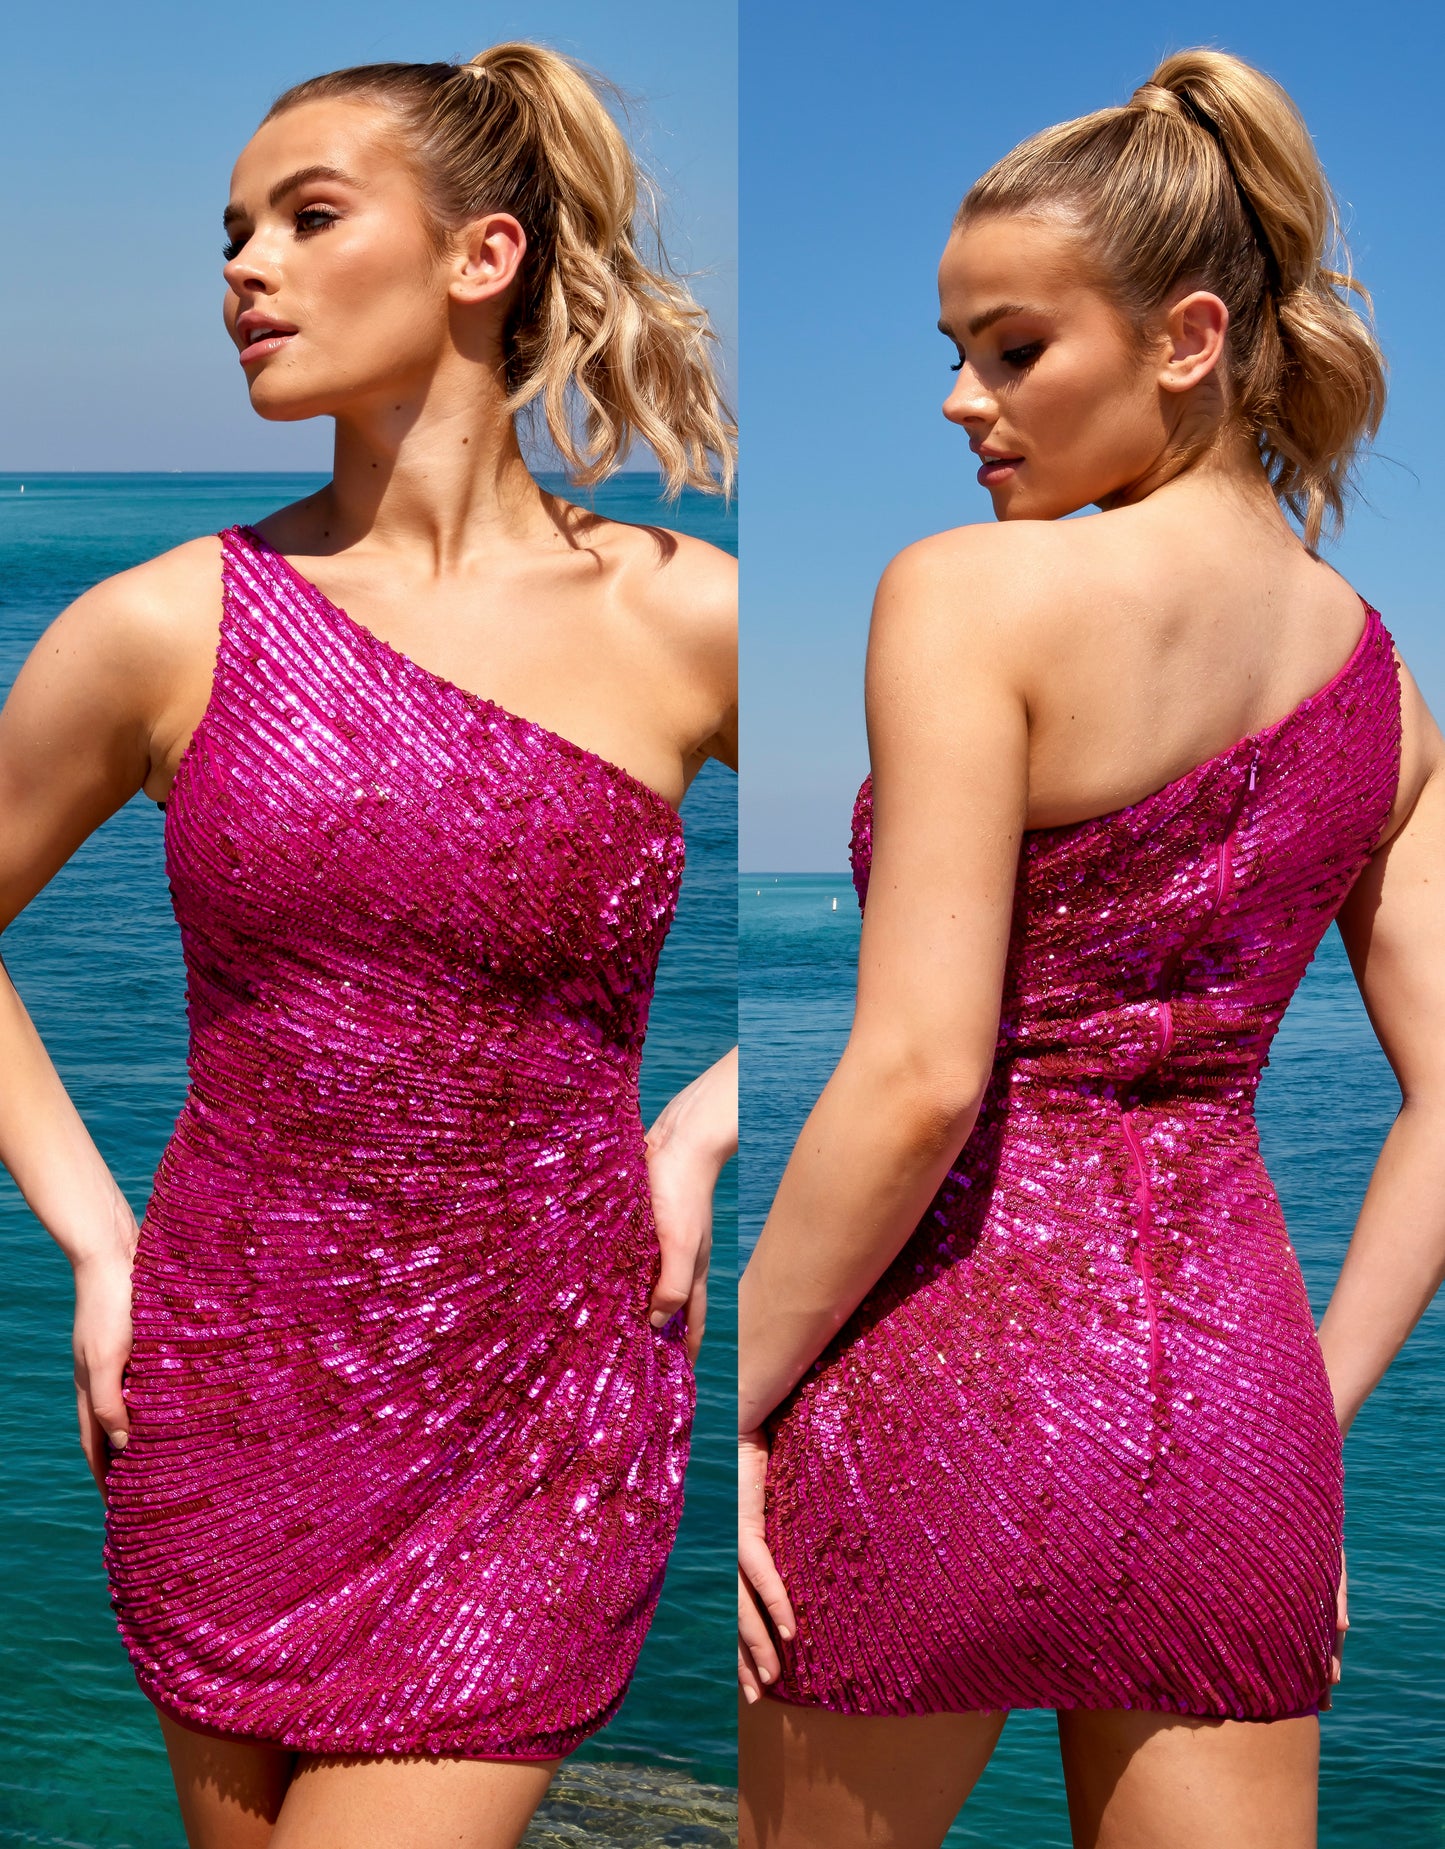 Primavera Couture 4055 Ruched Side One Shoulder Sequin And Beaded Line Design Homecoming Dress. This Primavera Couture 4055 Homecoming Dress adds just the right amount of sparkle with a multi-dimensional sequin and beaded line design. The ruched side and one shoulder strap gives a flattering look that is sure to turn heads.